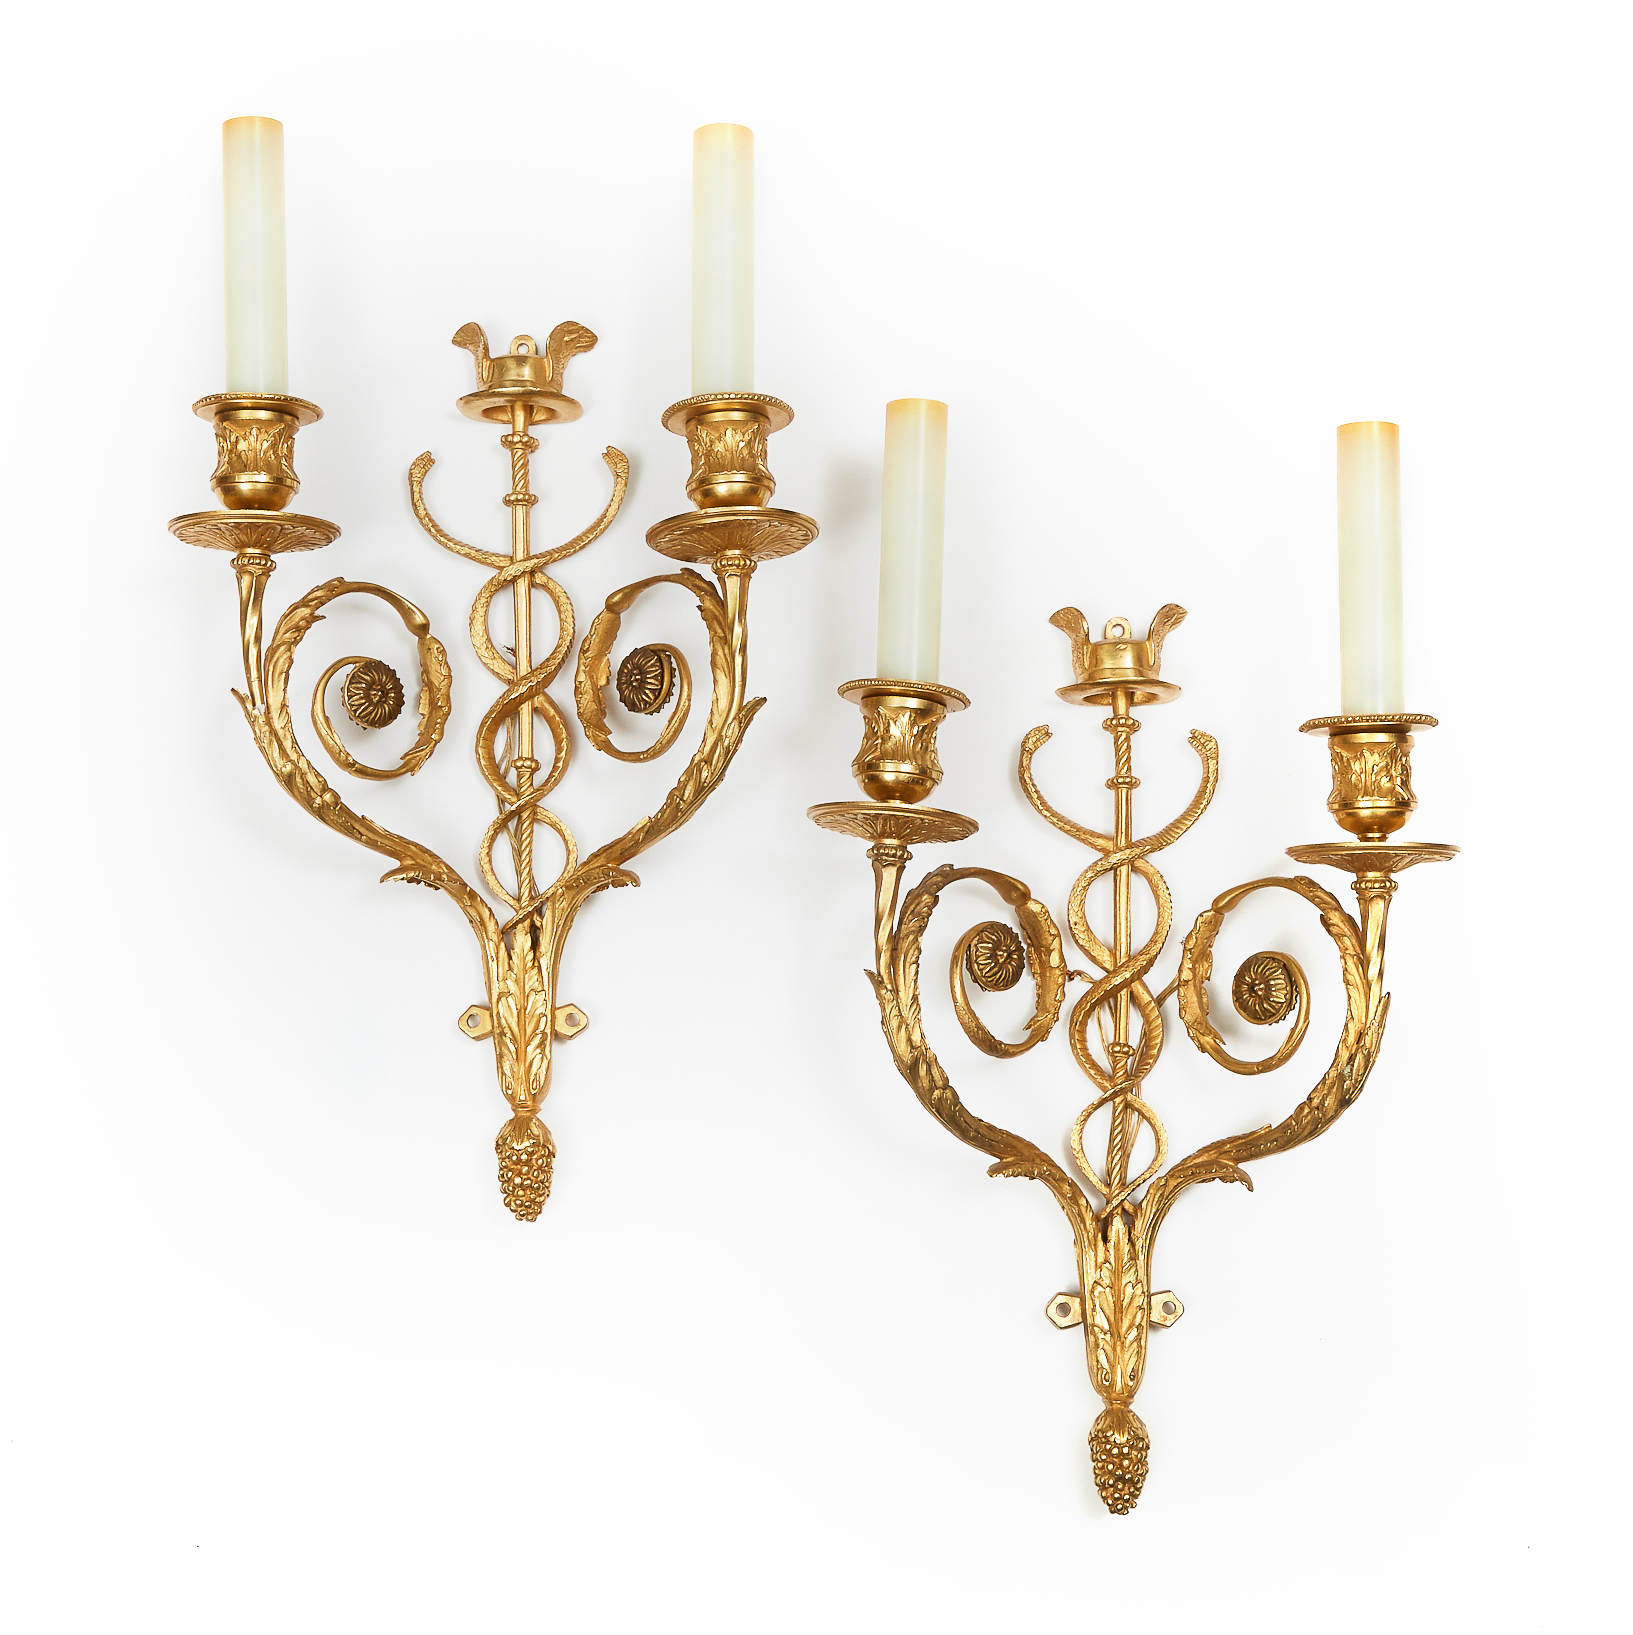 Pair of French Gilt Bronze Caduceus Form Two Light Wall Sconces, mid 20th century